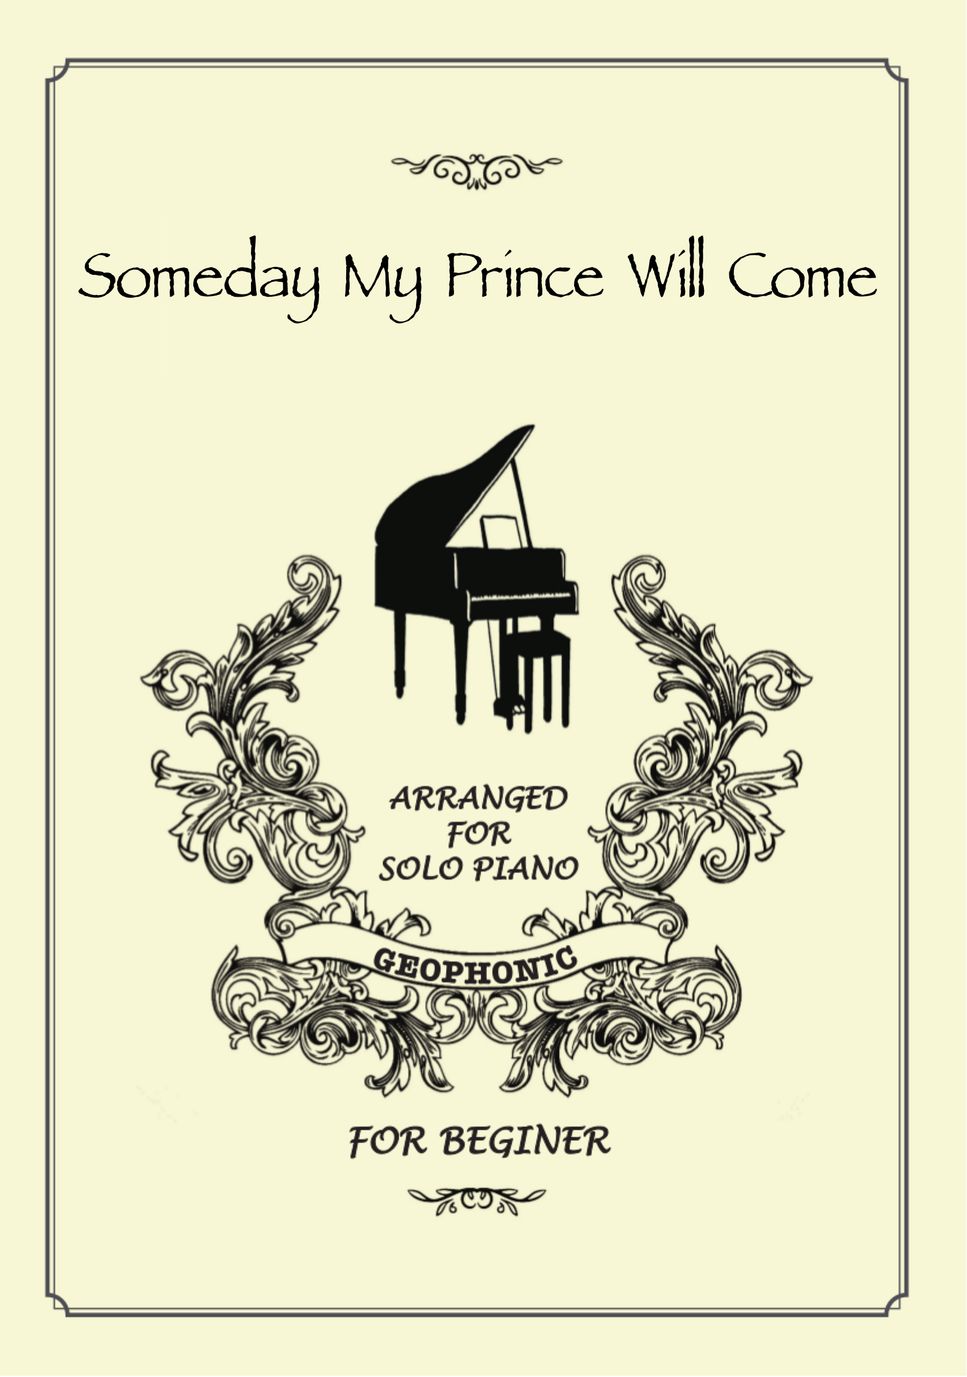 FRANK CHURCHILL - SOME DAY MY PRINCE WILL COME by GEOPHONIC